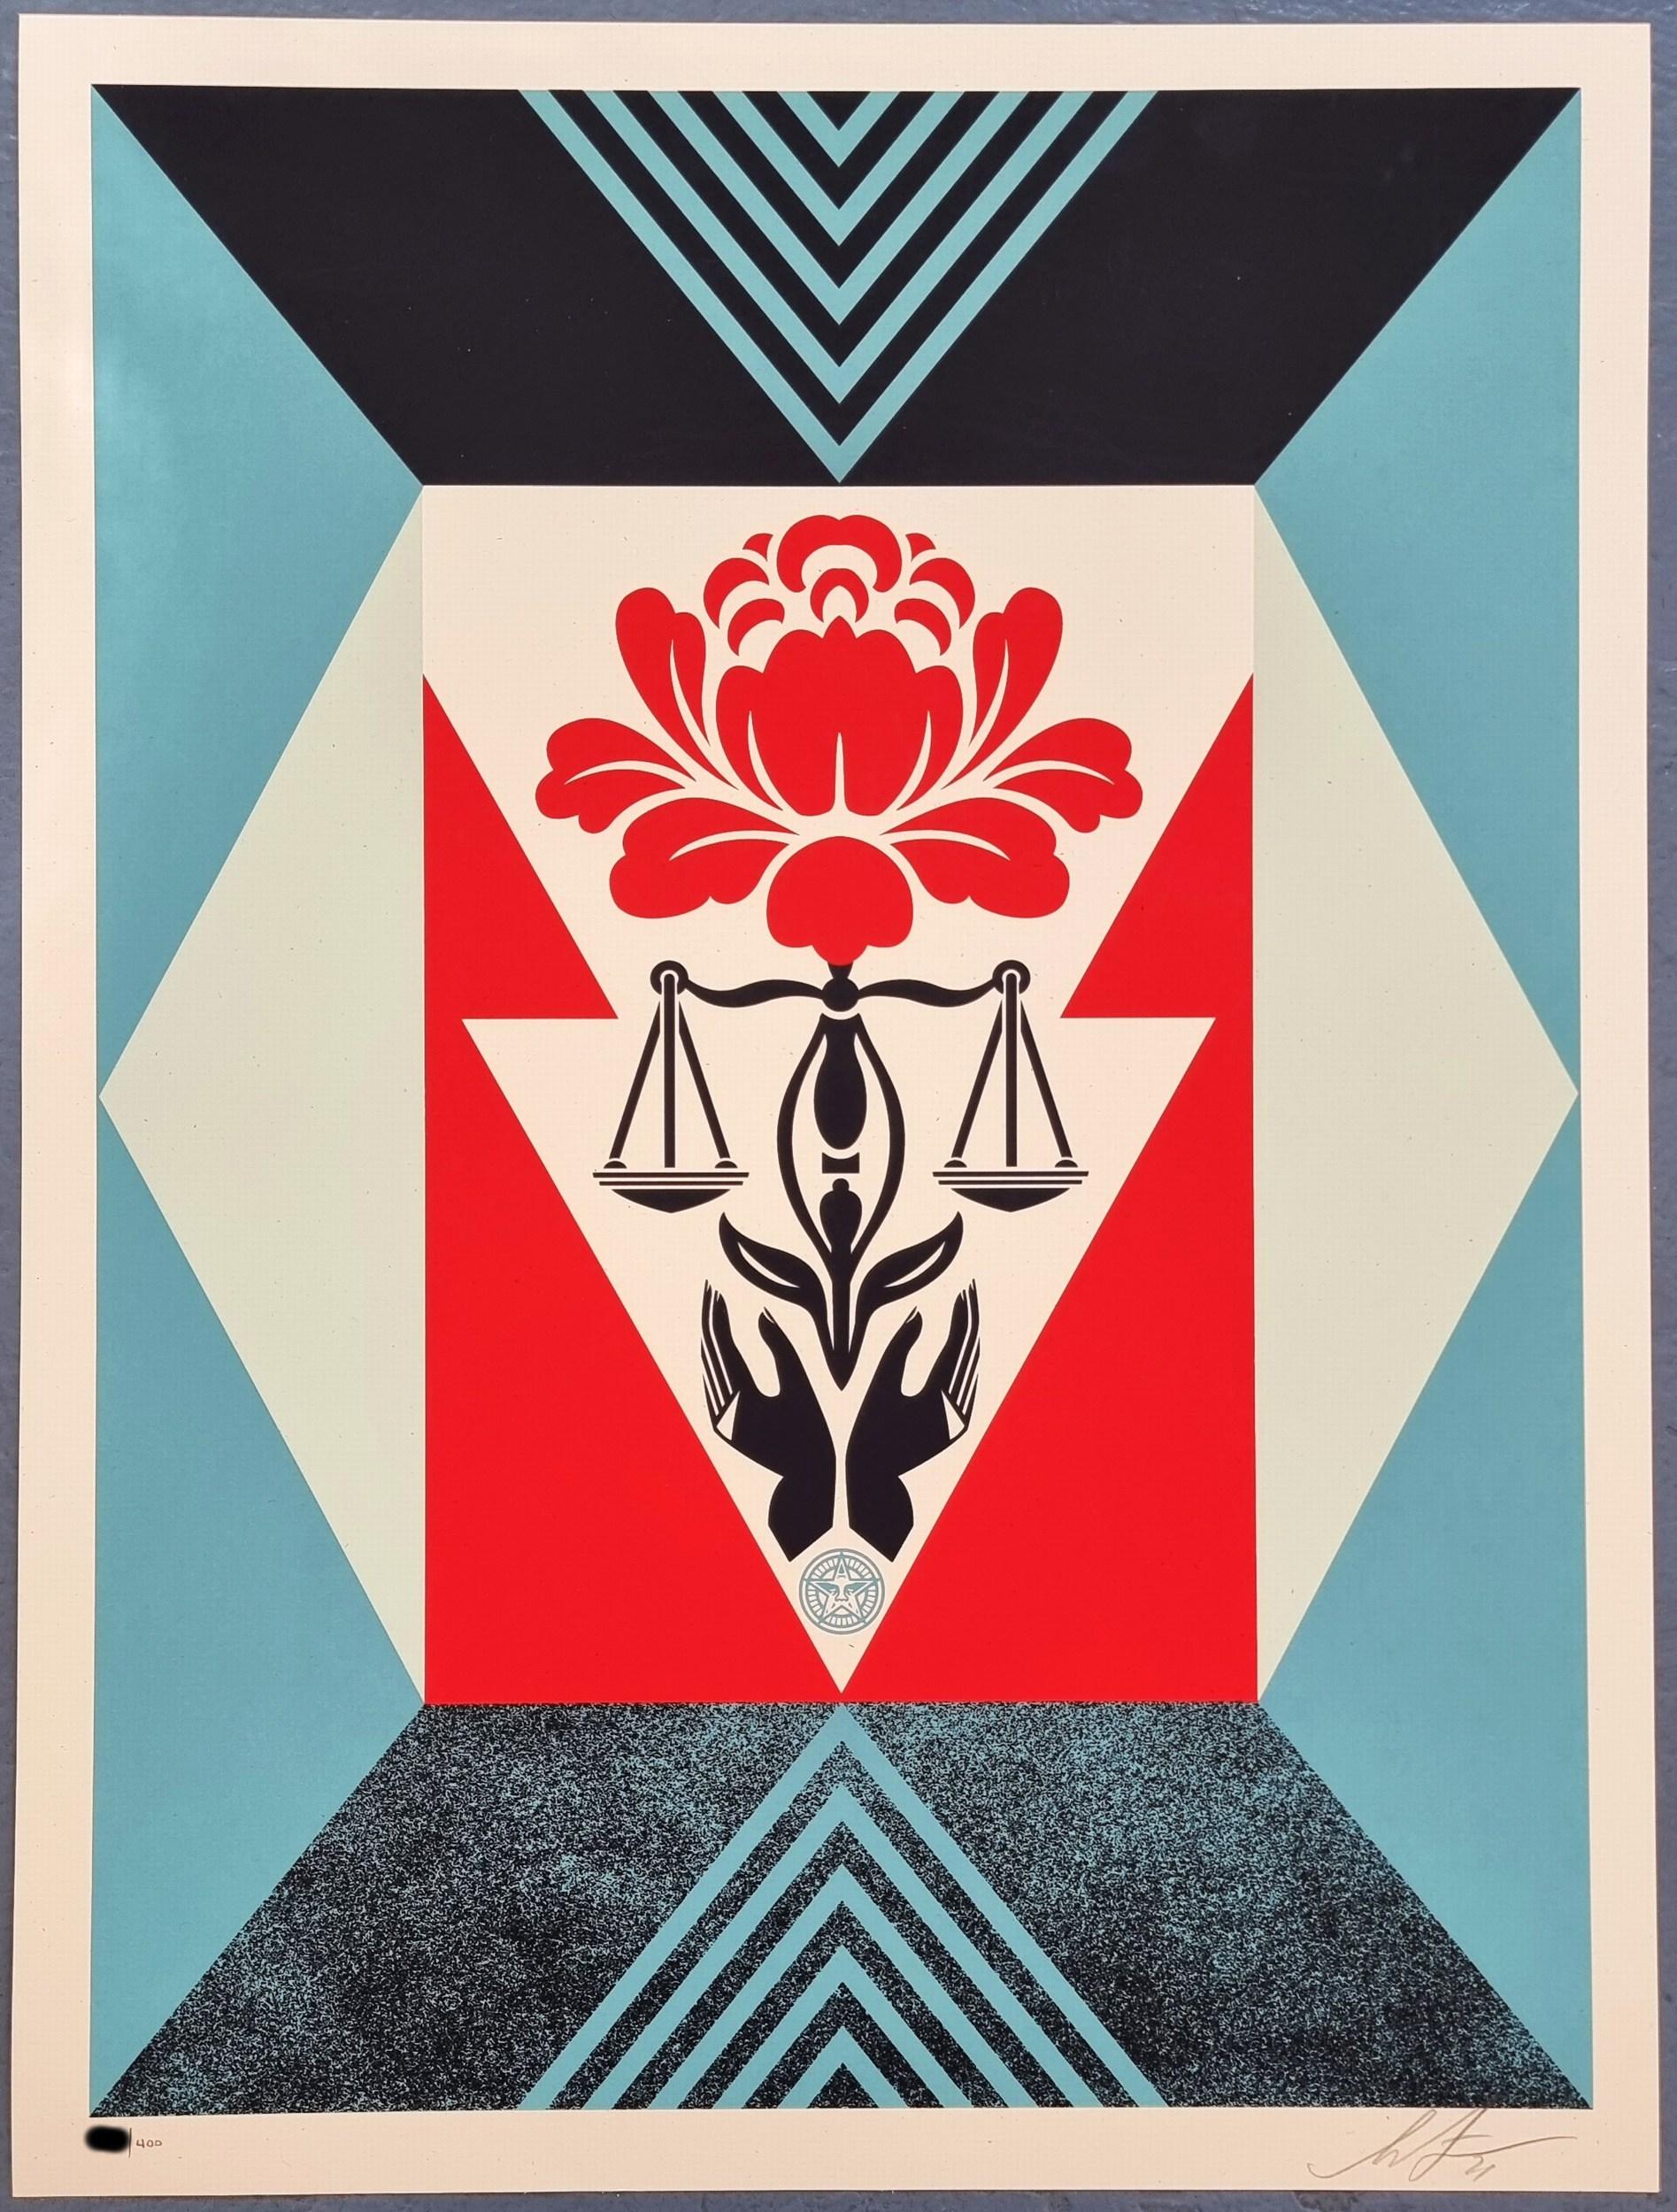 Cultivate Justice (Red) (Environmental, Racial, Economic, Gender Equality) - Print by Shepard Fairey